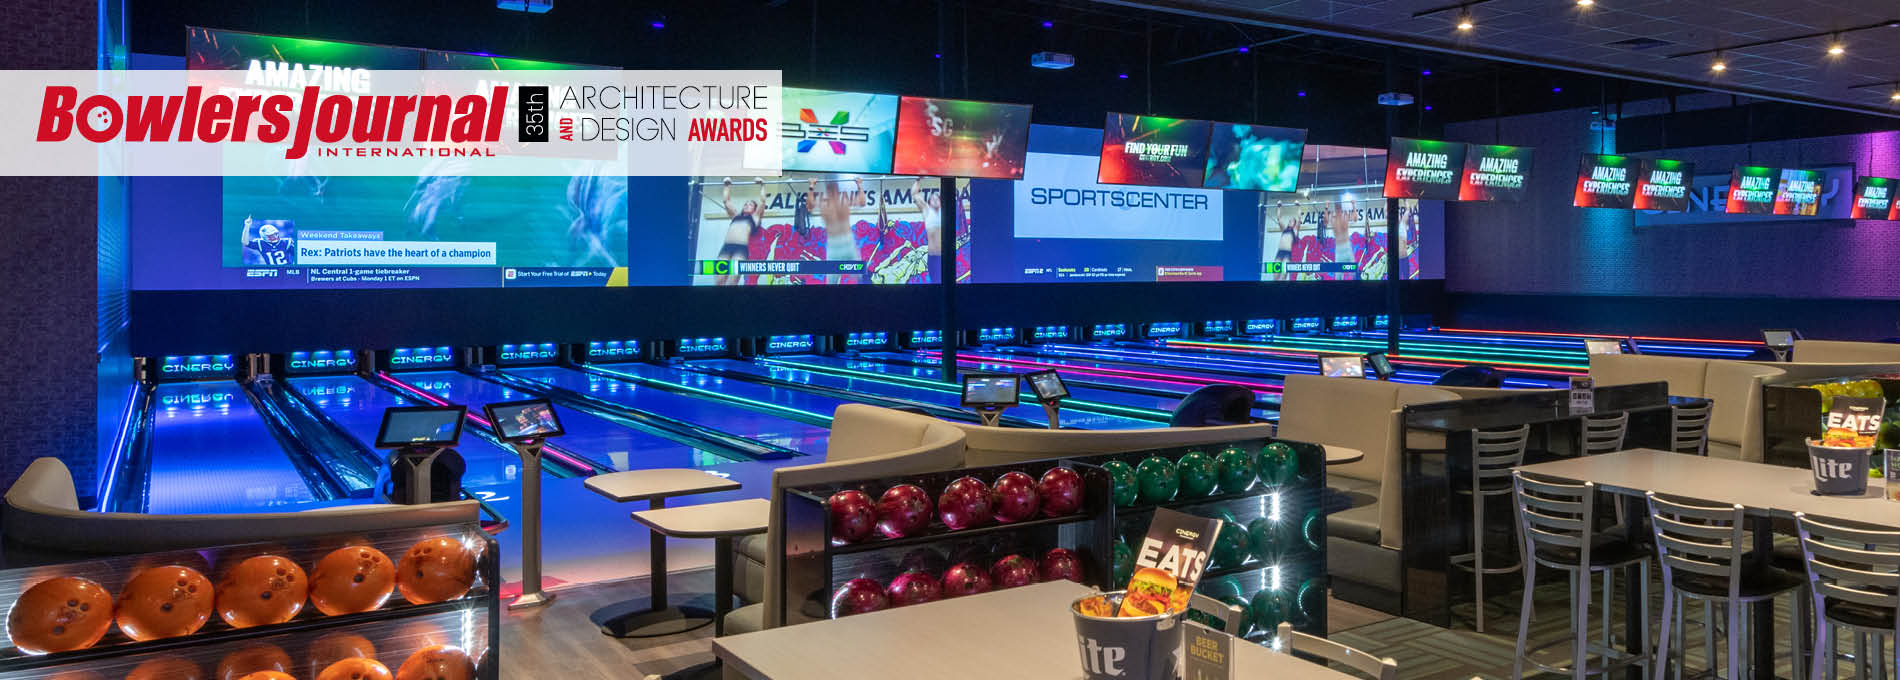 QubicaAMF bowling 35 architectual design awards home banner Cinergy Amarillo